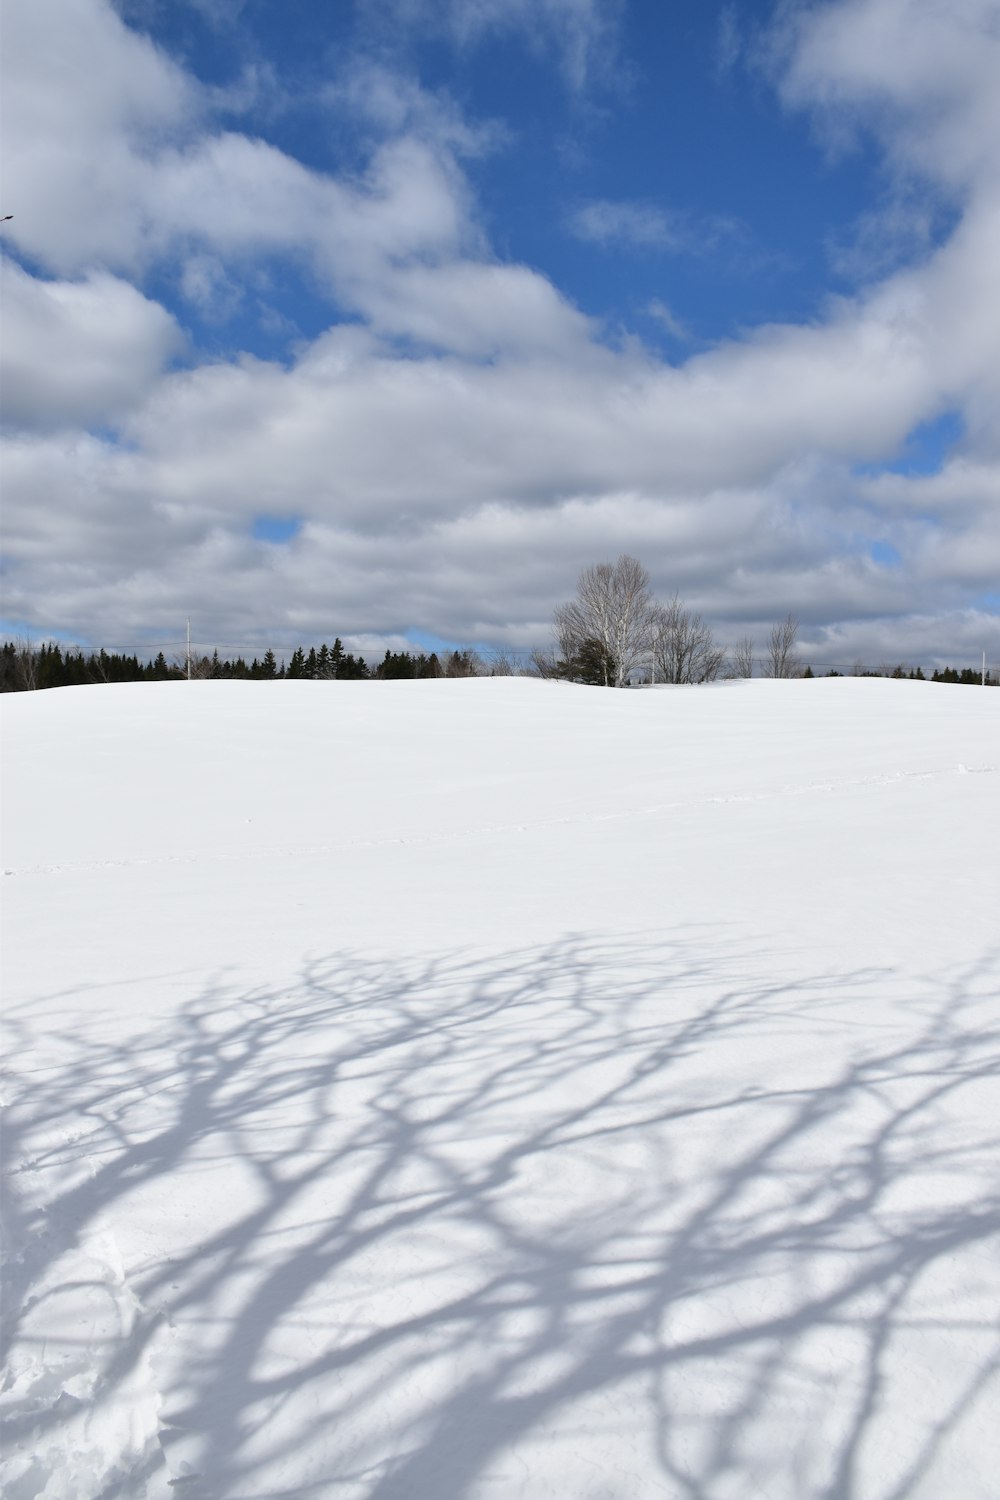 a lone tree casts a shadow on the snow